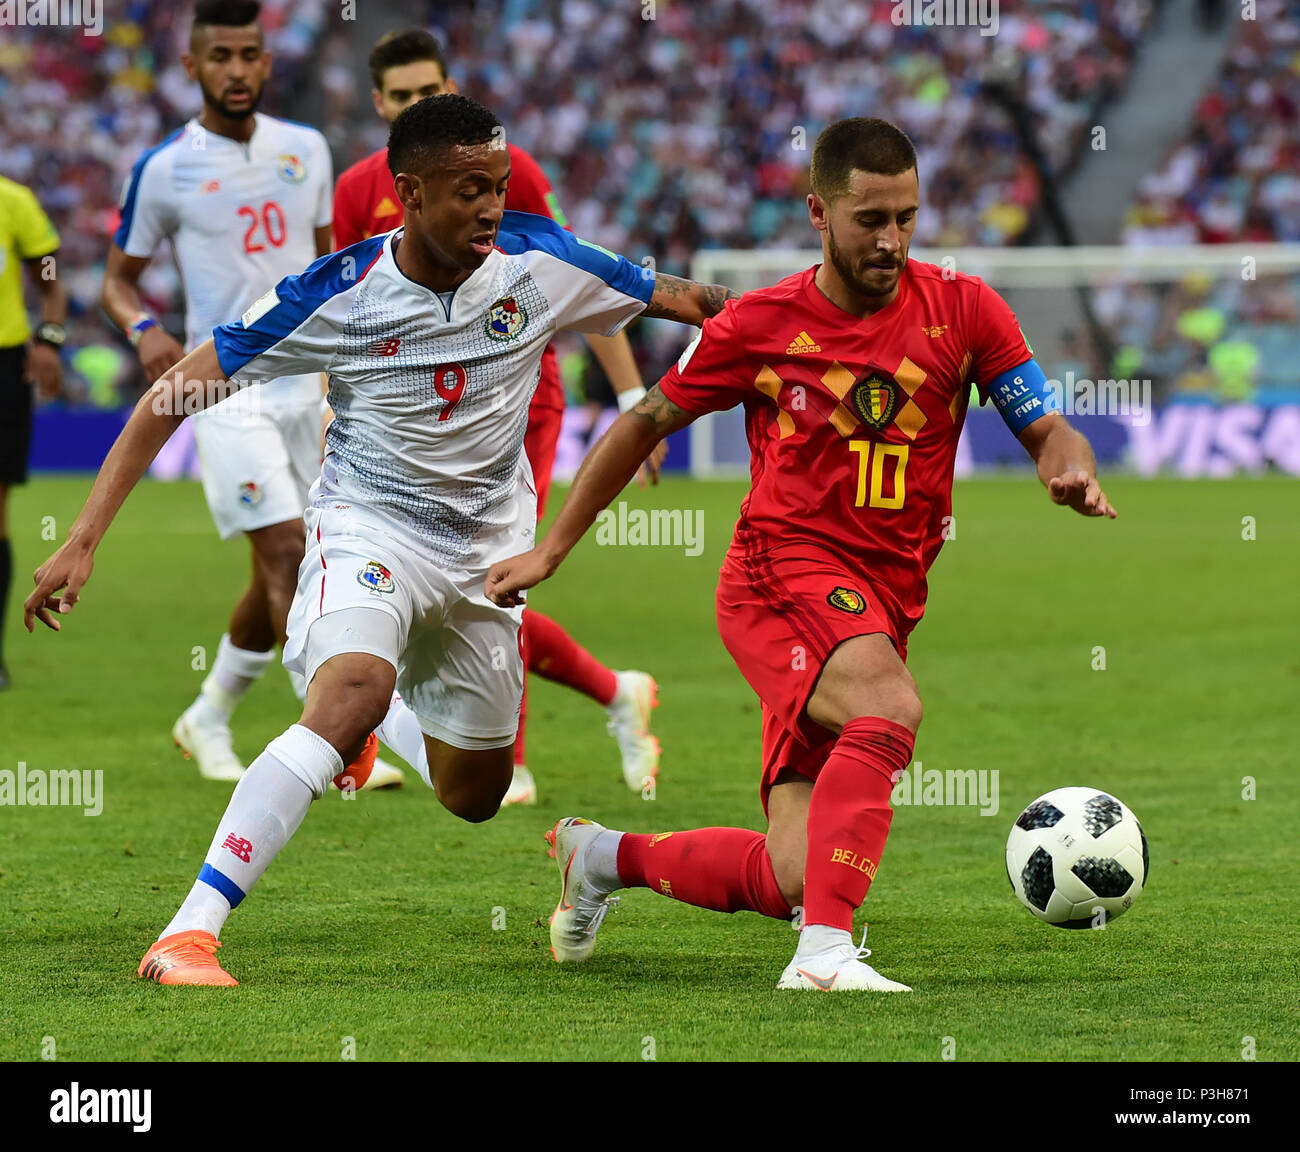 Sochi, Russia. 18th June, 2018. Eden Hazard (R) of Belgium vies with Gabriel Torres of Panama during a group G match between Belgium and Panama at the 2018 FIFA World Cup in Sochi, Russia, June 18, 2018. Belgium won 3-0. Credit: Du Yu/Xinhua/Alamy Live News Stock Photo